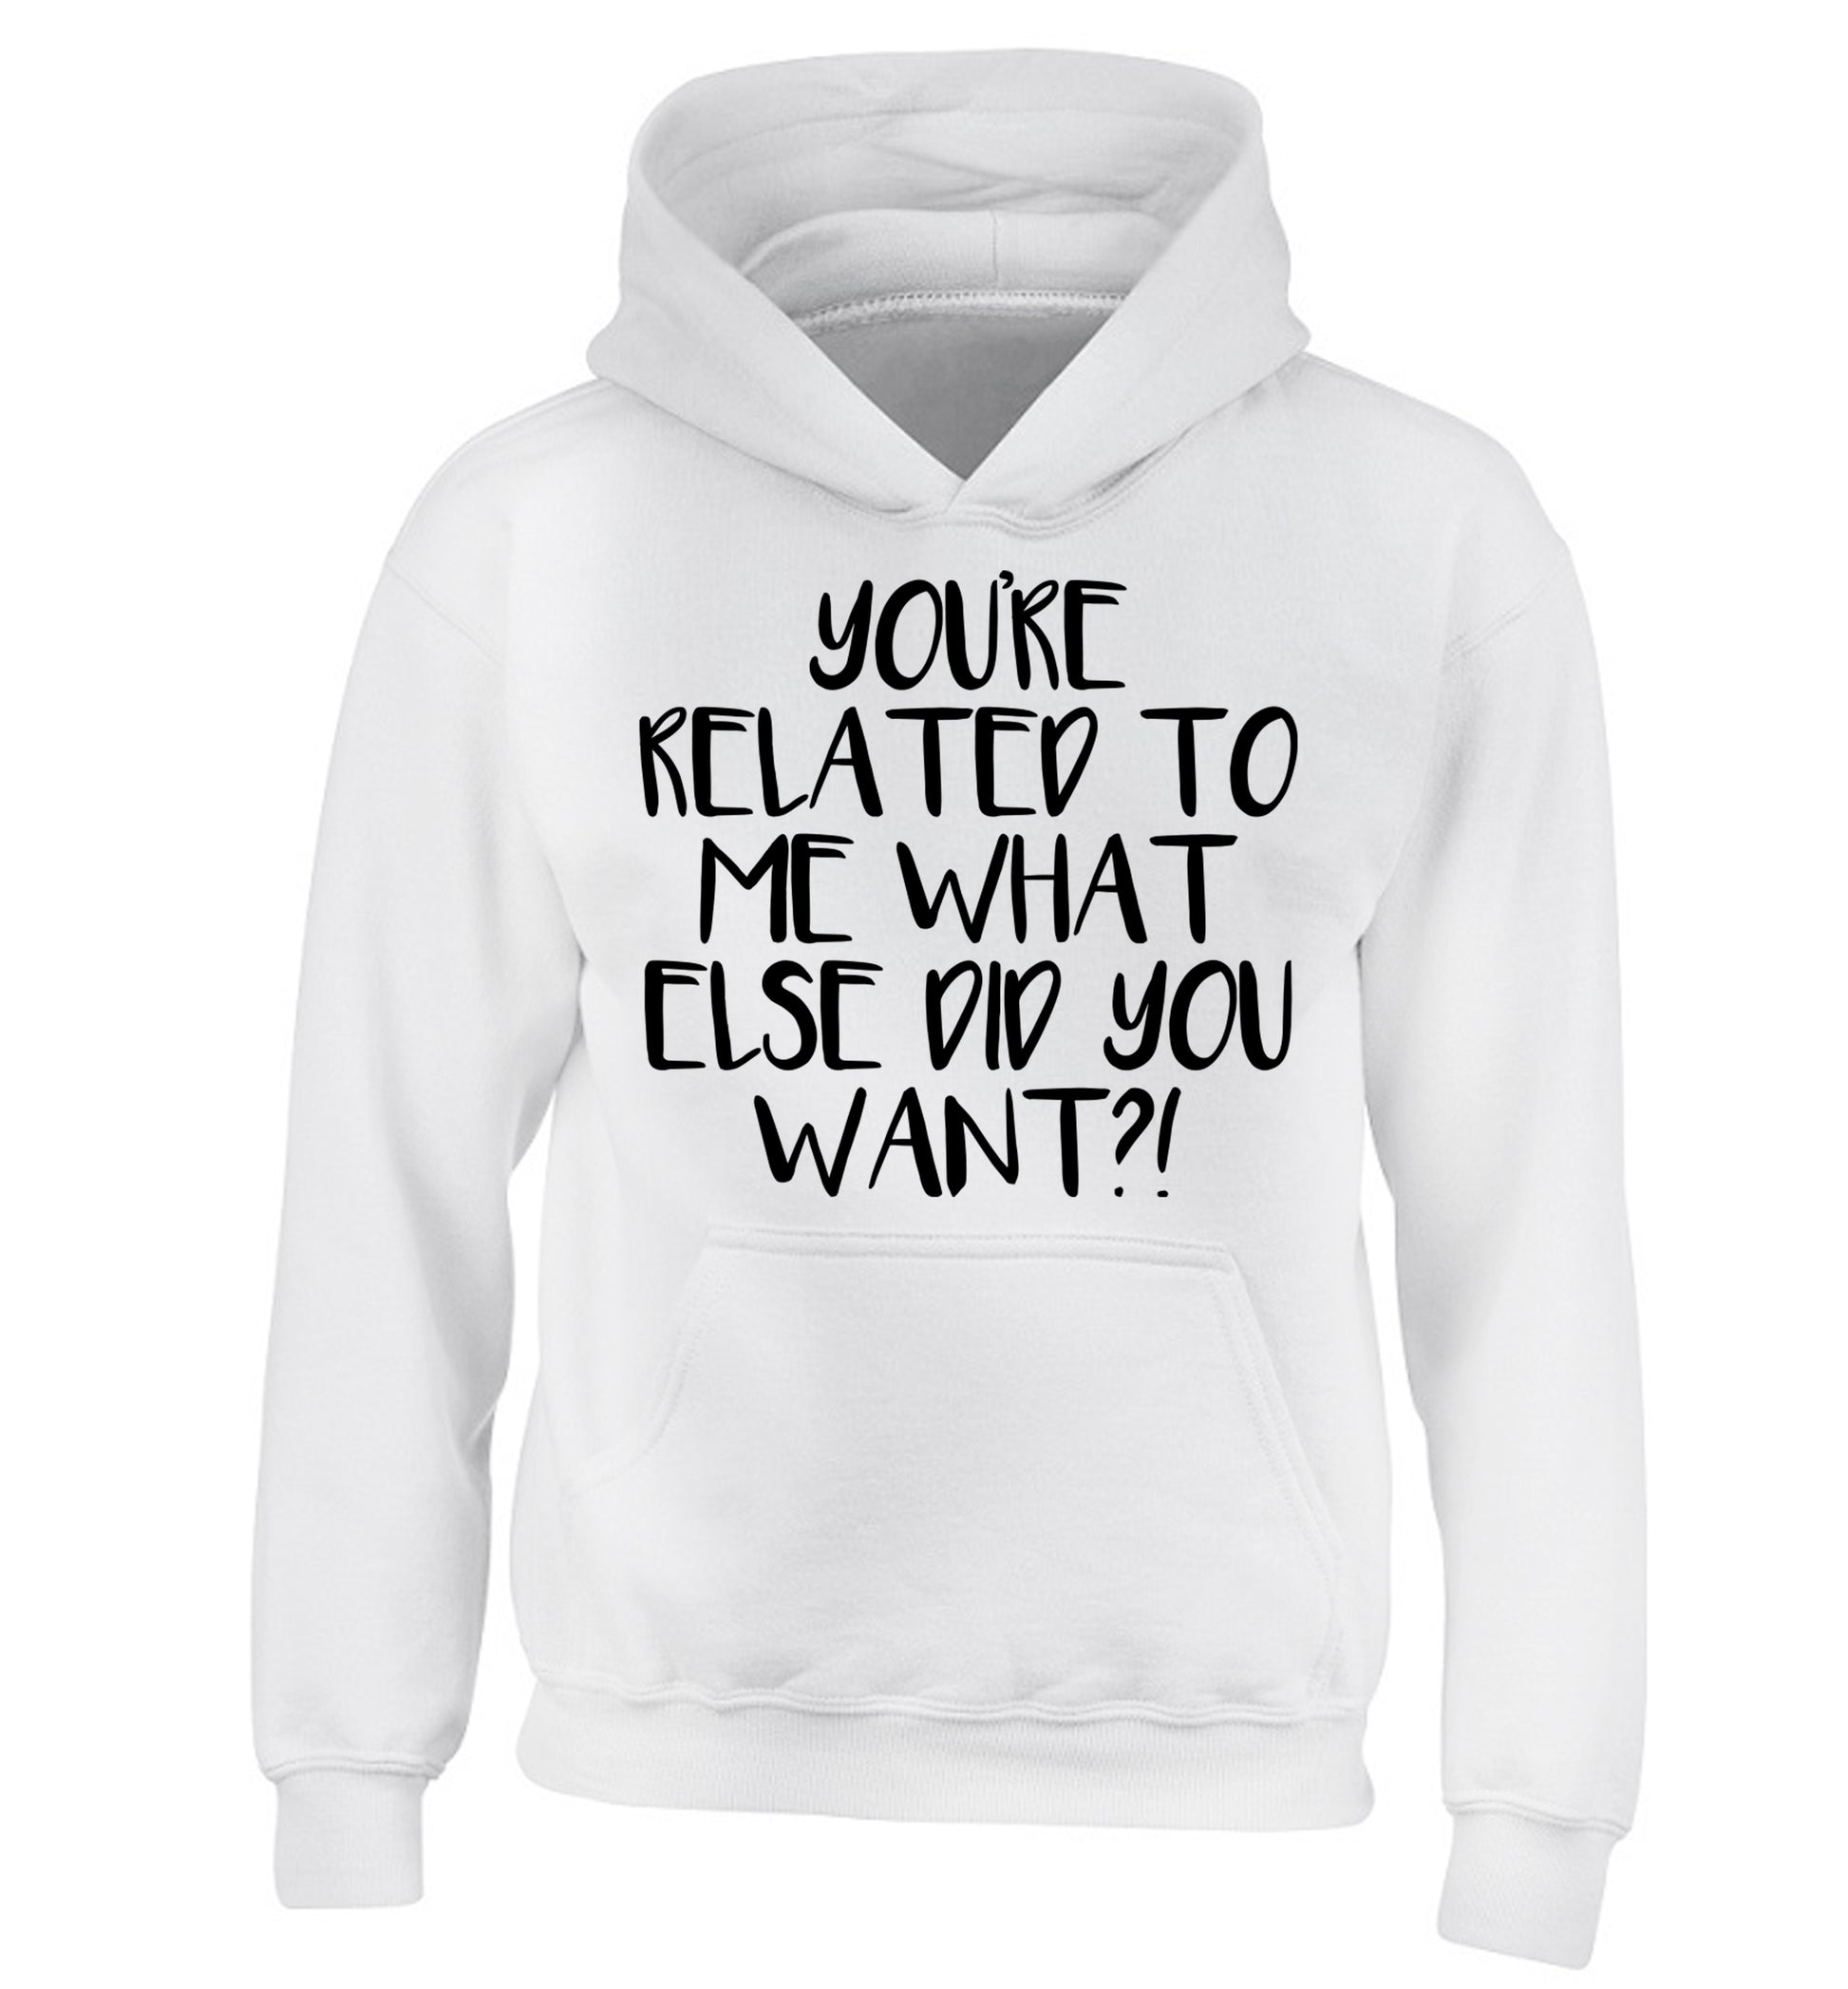 You're related to me what more do you want? children's white hoodie 12-13 Years